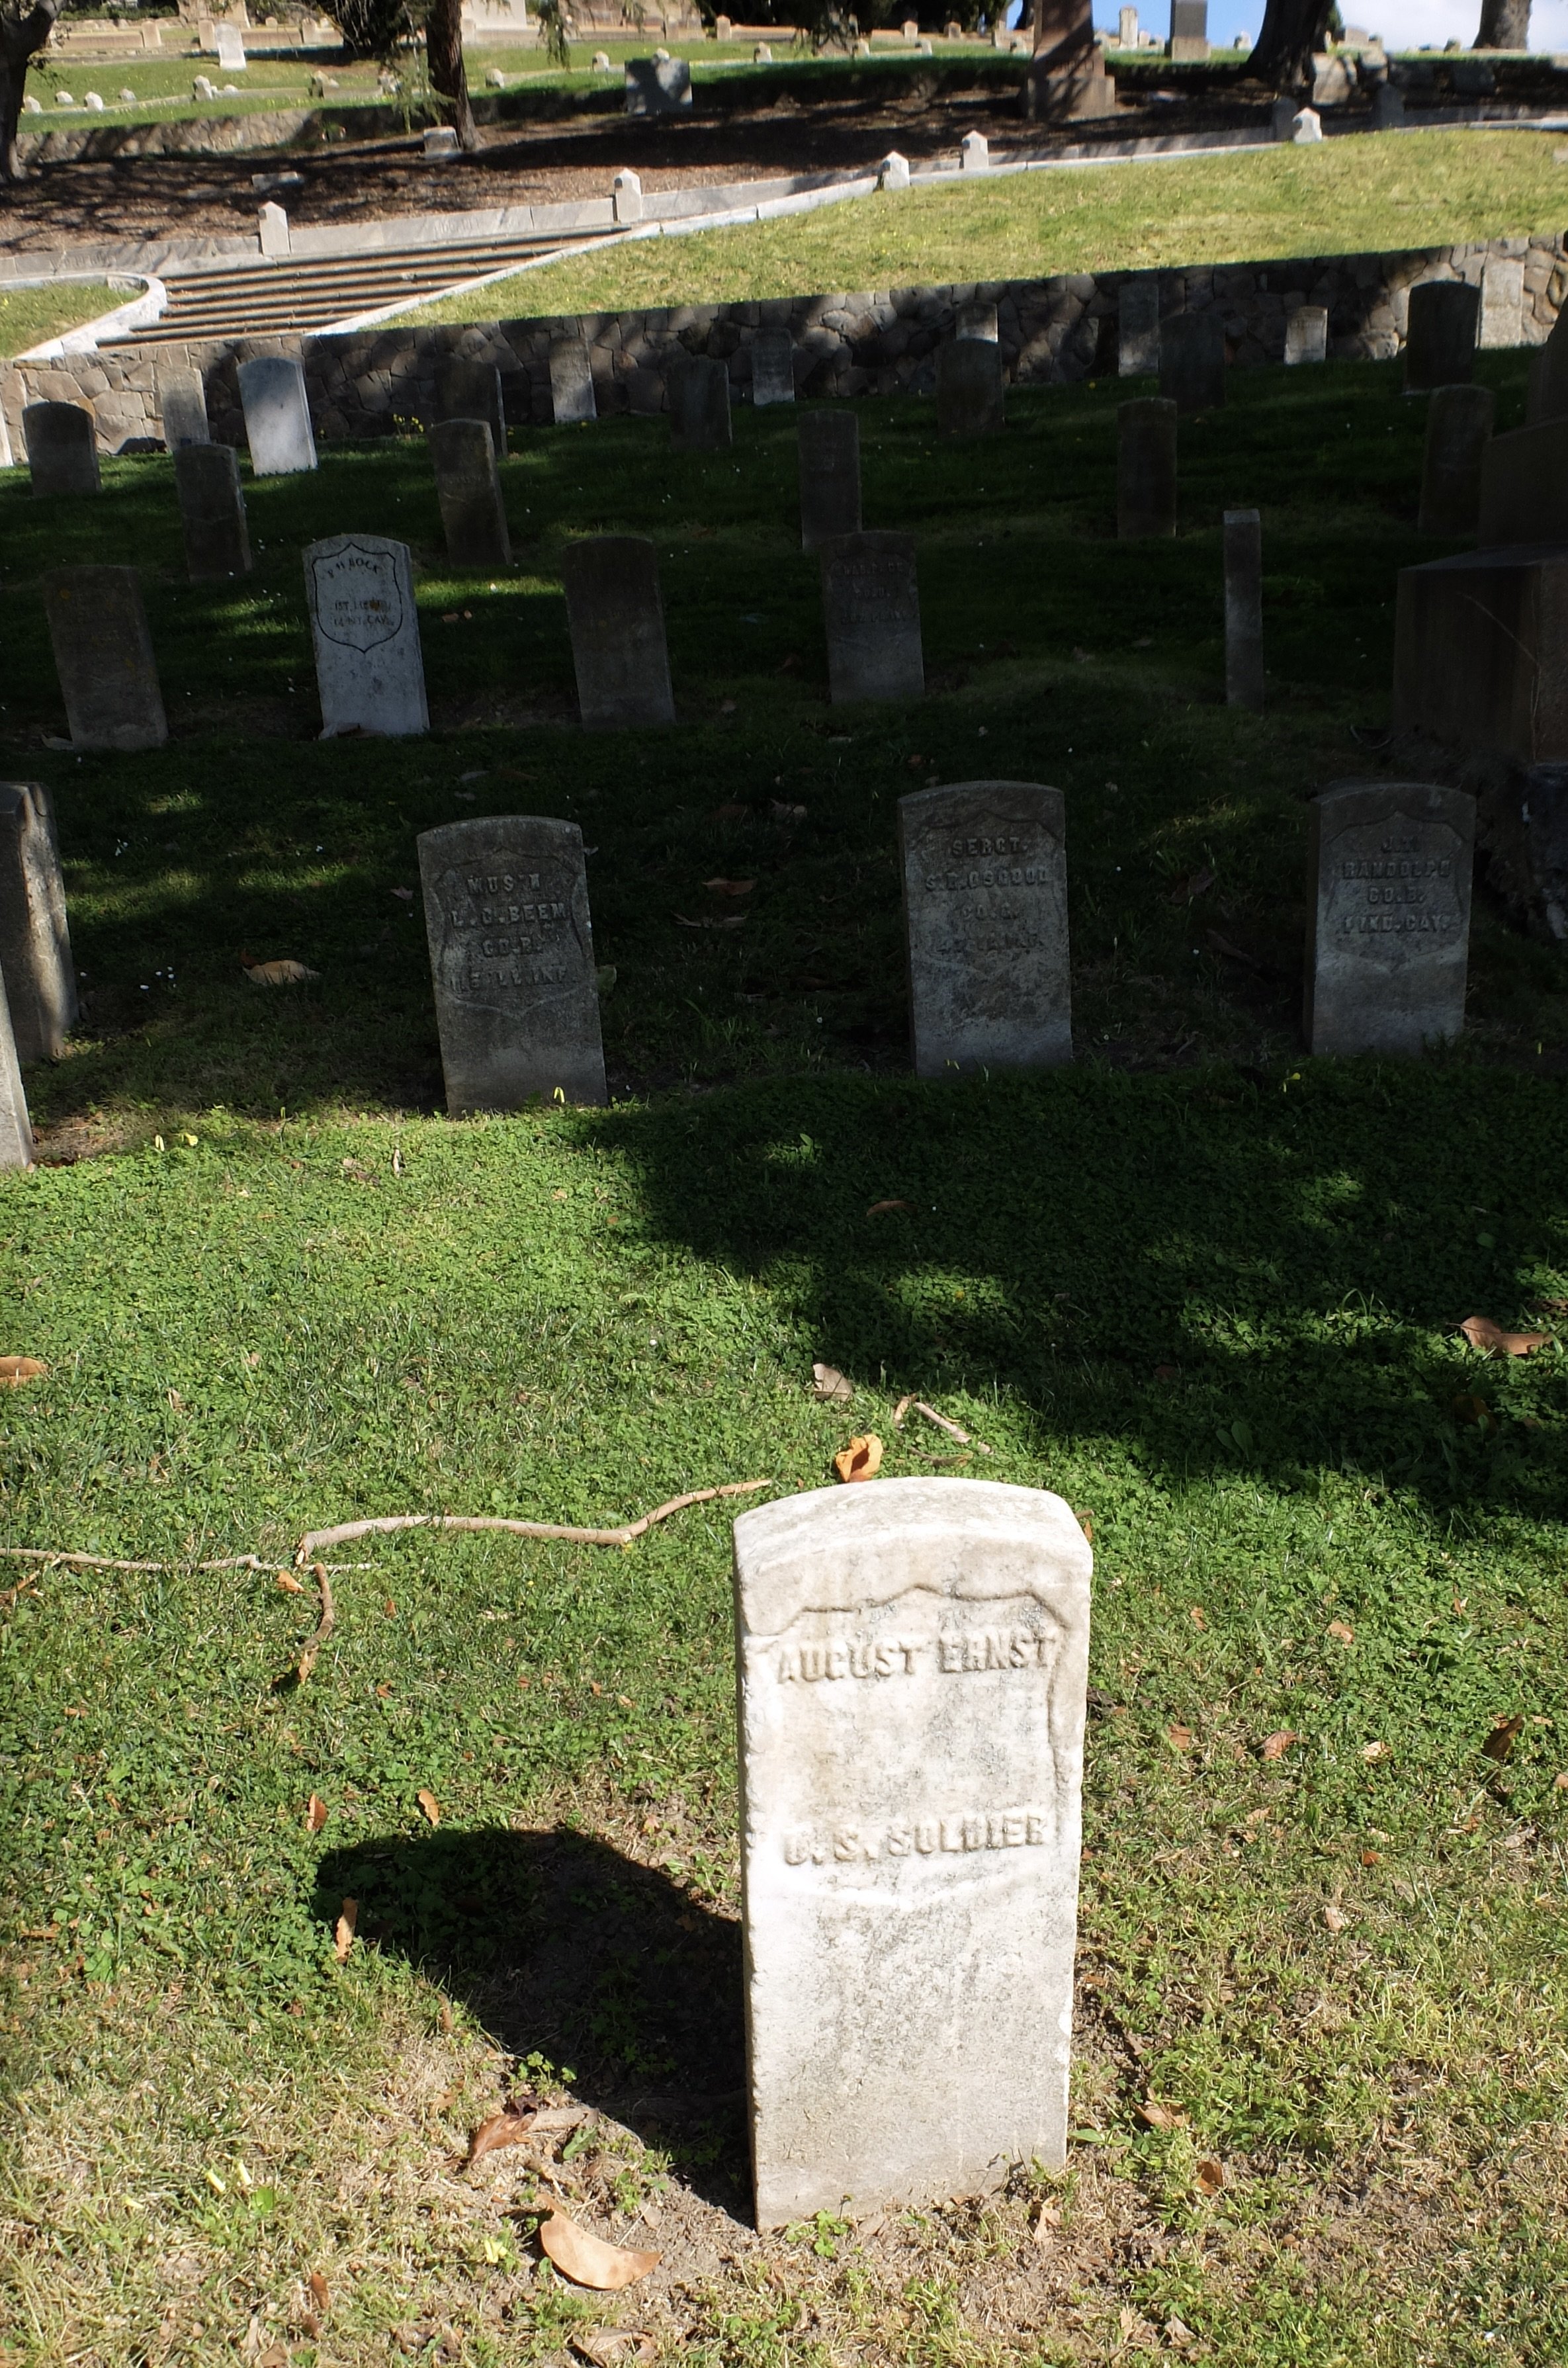 Many tombstones simply said "U.S. SOLDIER" or "U.S. NAVY."